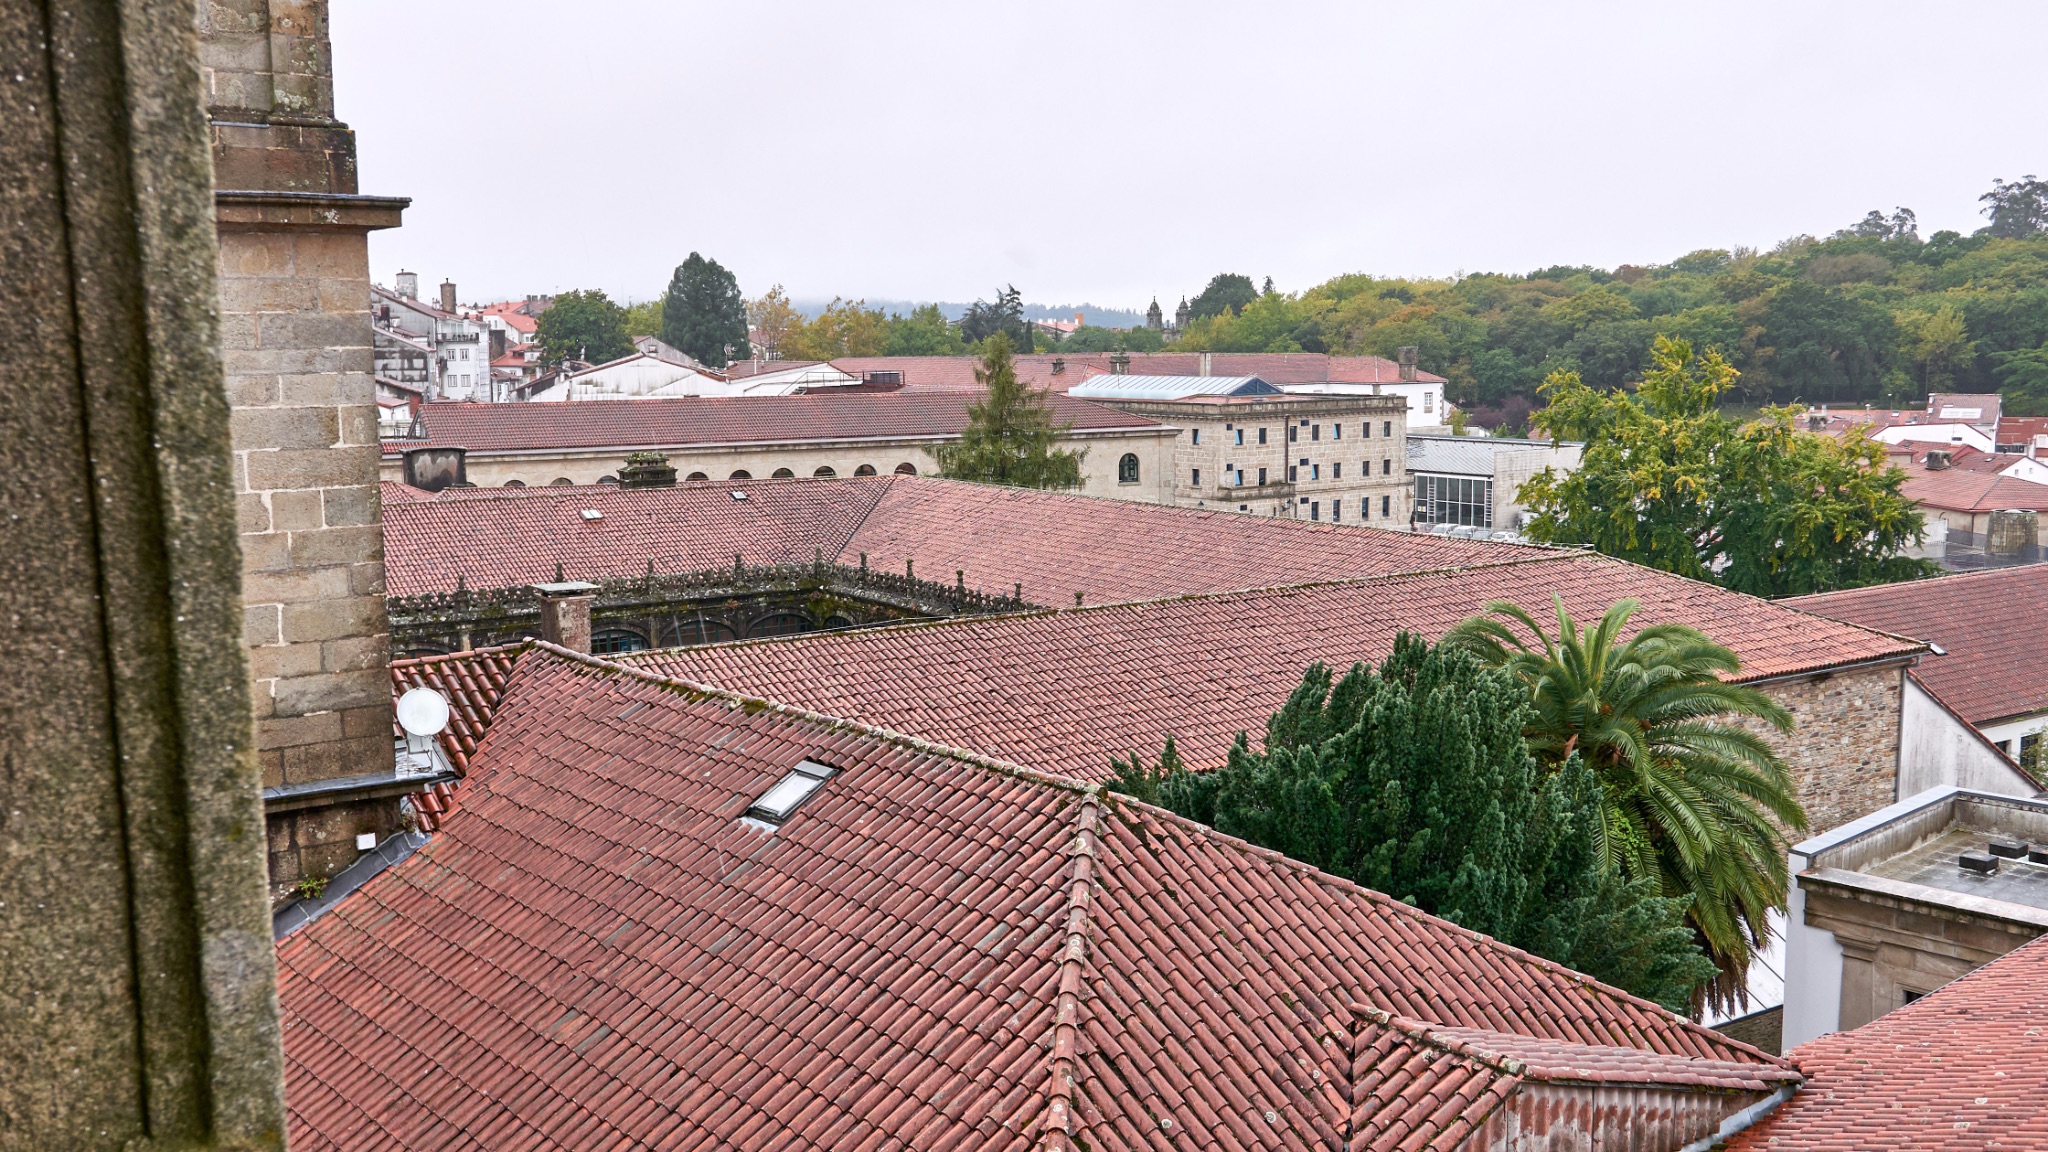 Roofs as seen from the Cathedral Museum tour